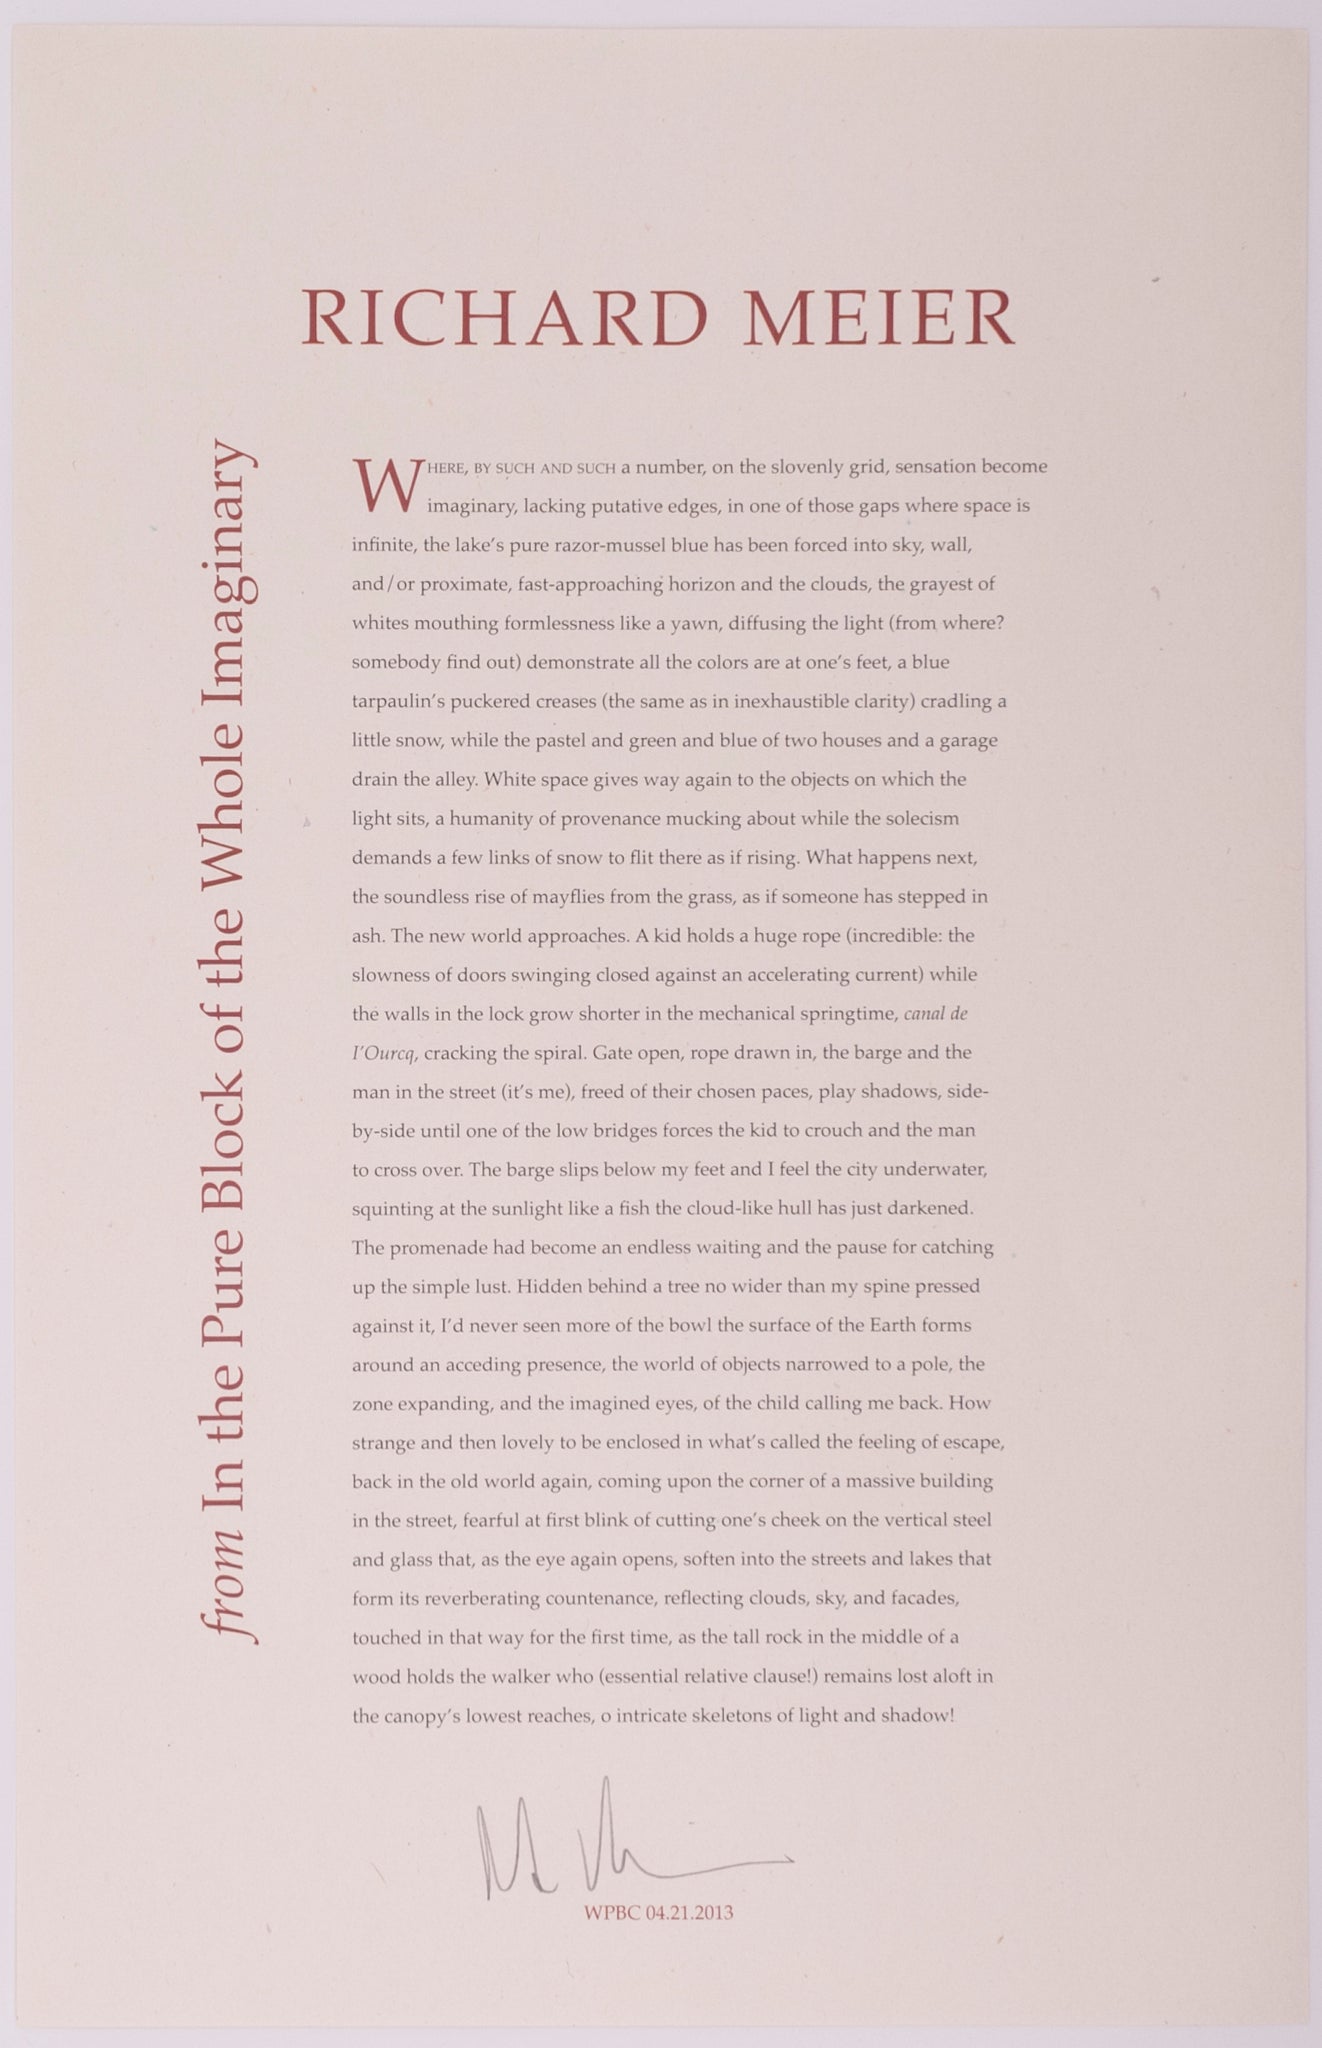 Broadside titled from in the pure block of the whole imaginary by Richard Meier. Red and black text on cream paper.